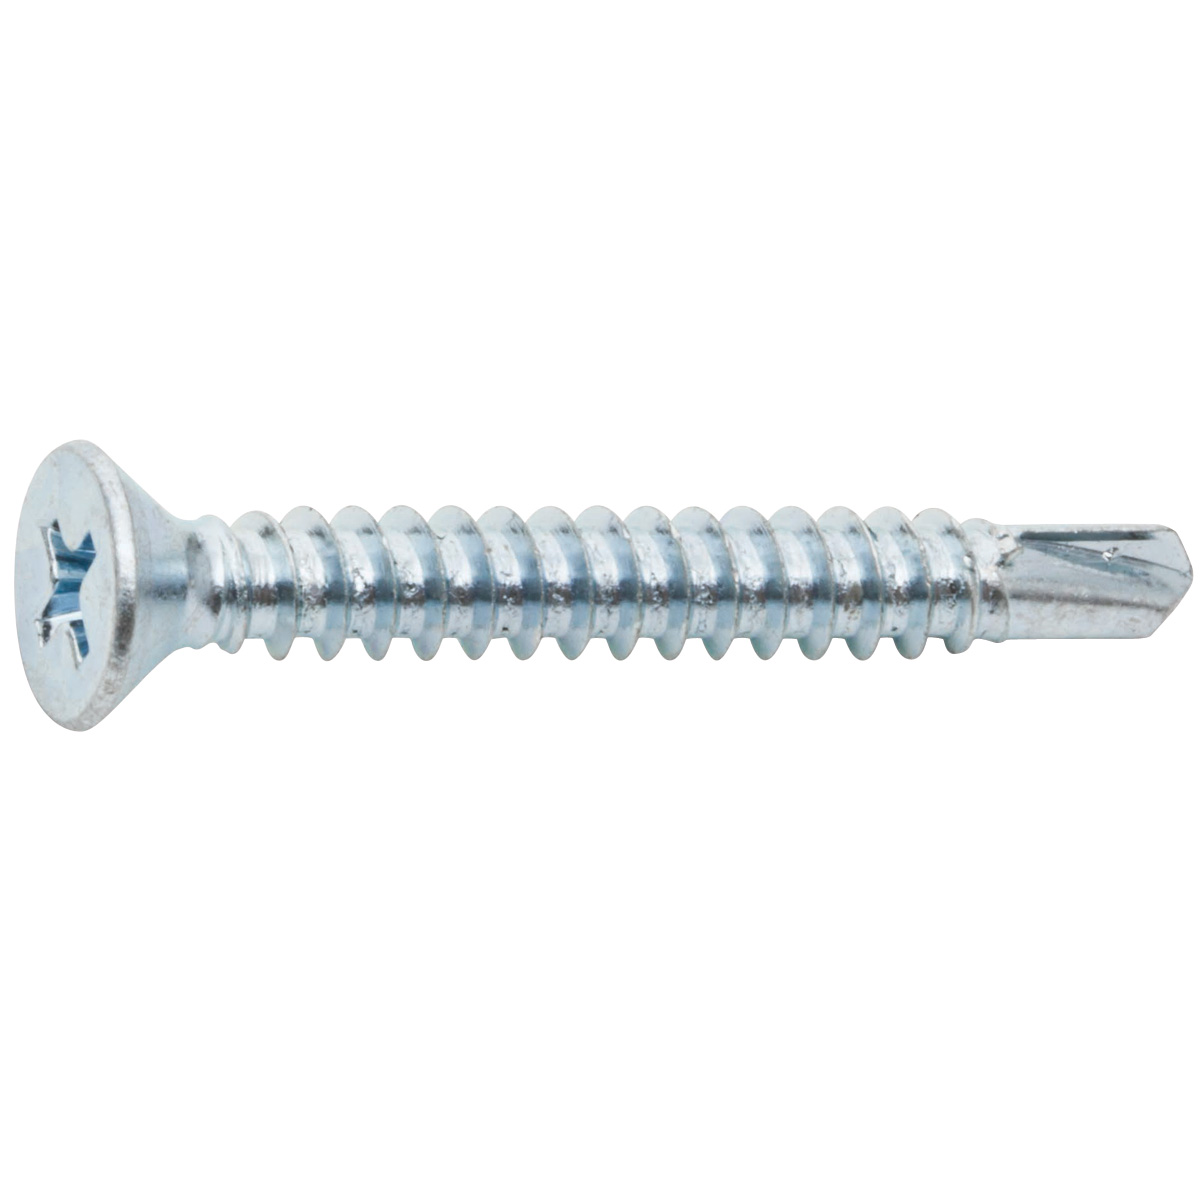 Steel Self-Drilling Screw 4 Length Phillips Drive #3 Drill Point #10-16 Thread Size 82 Degree Flat Head Pack of 10 Zinc Plated Finish